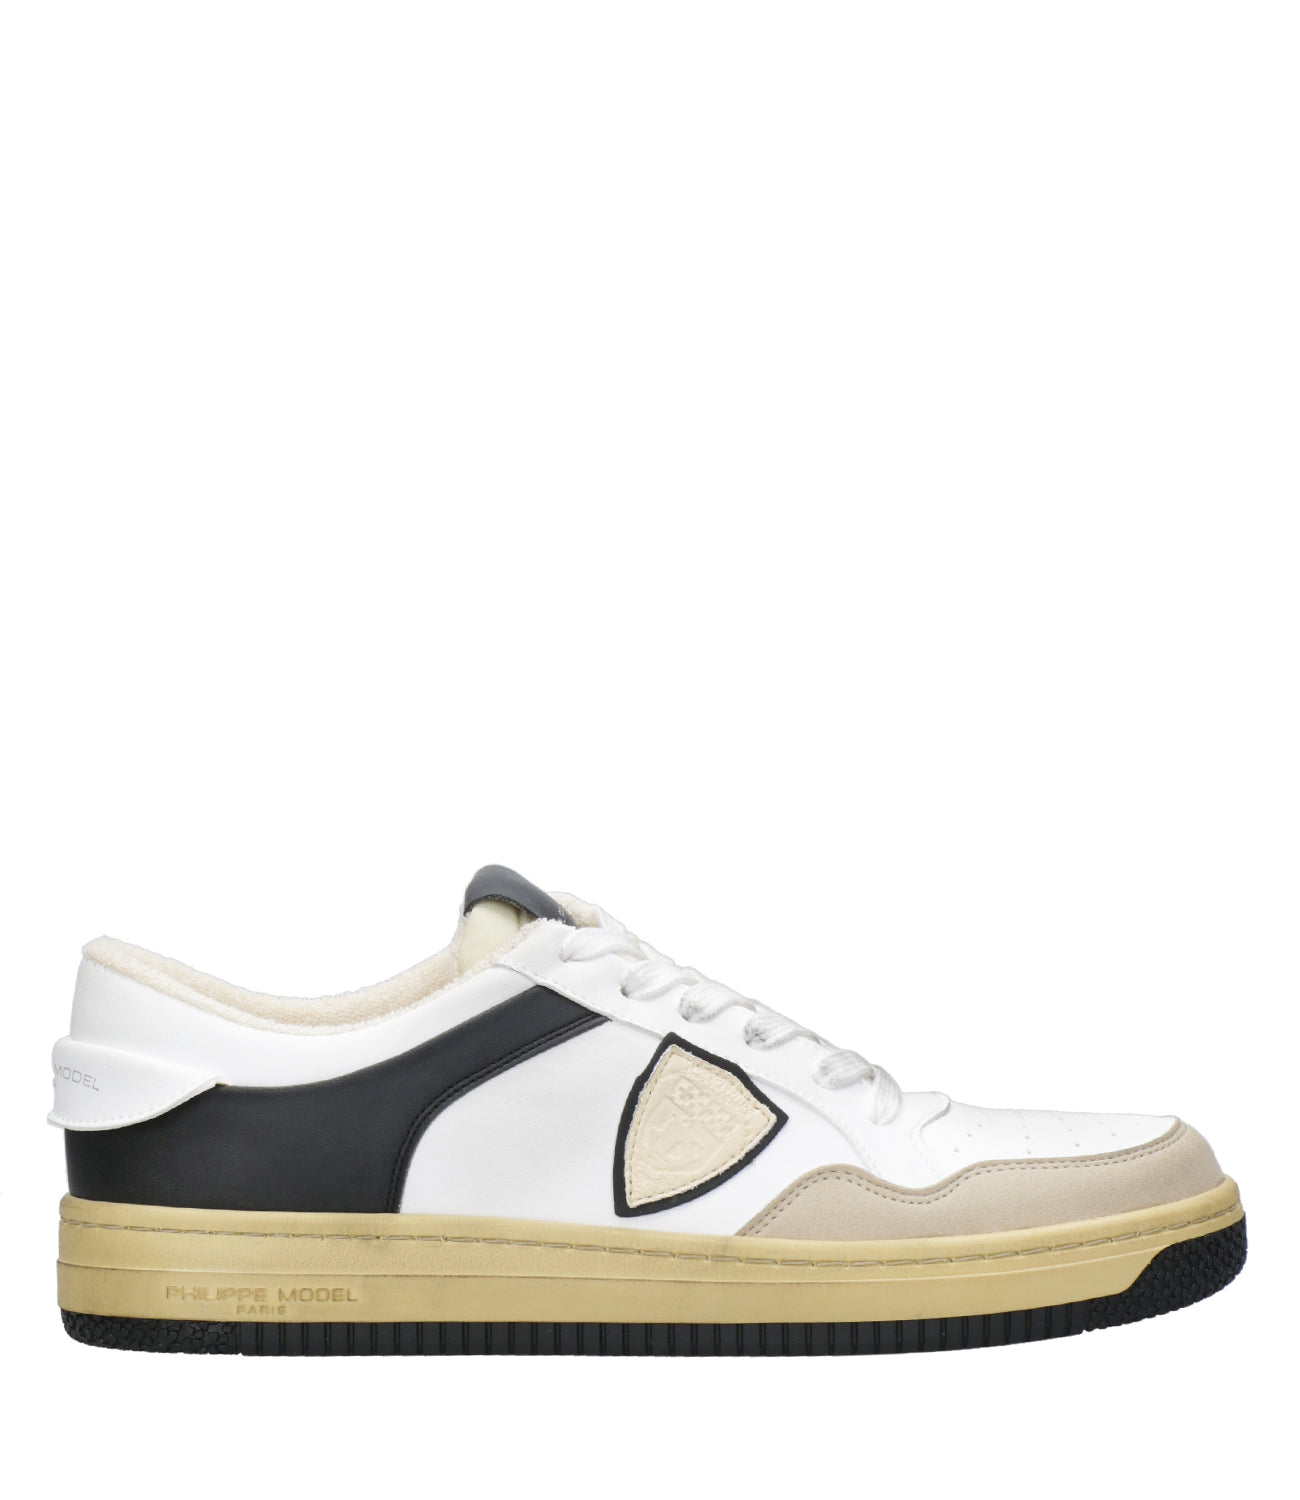 Philippe Model | Sneakers Lyon Low Man Black and White